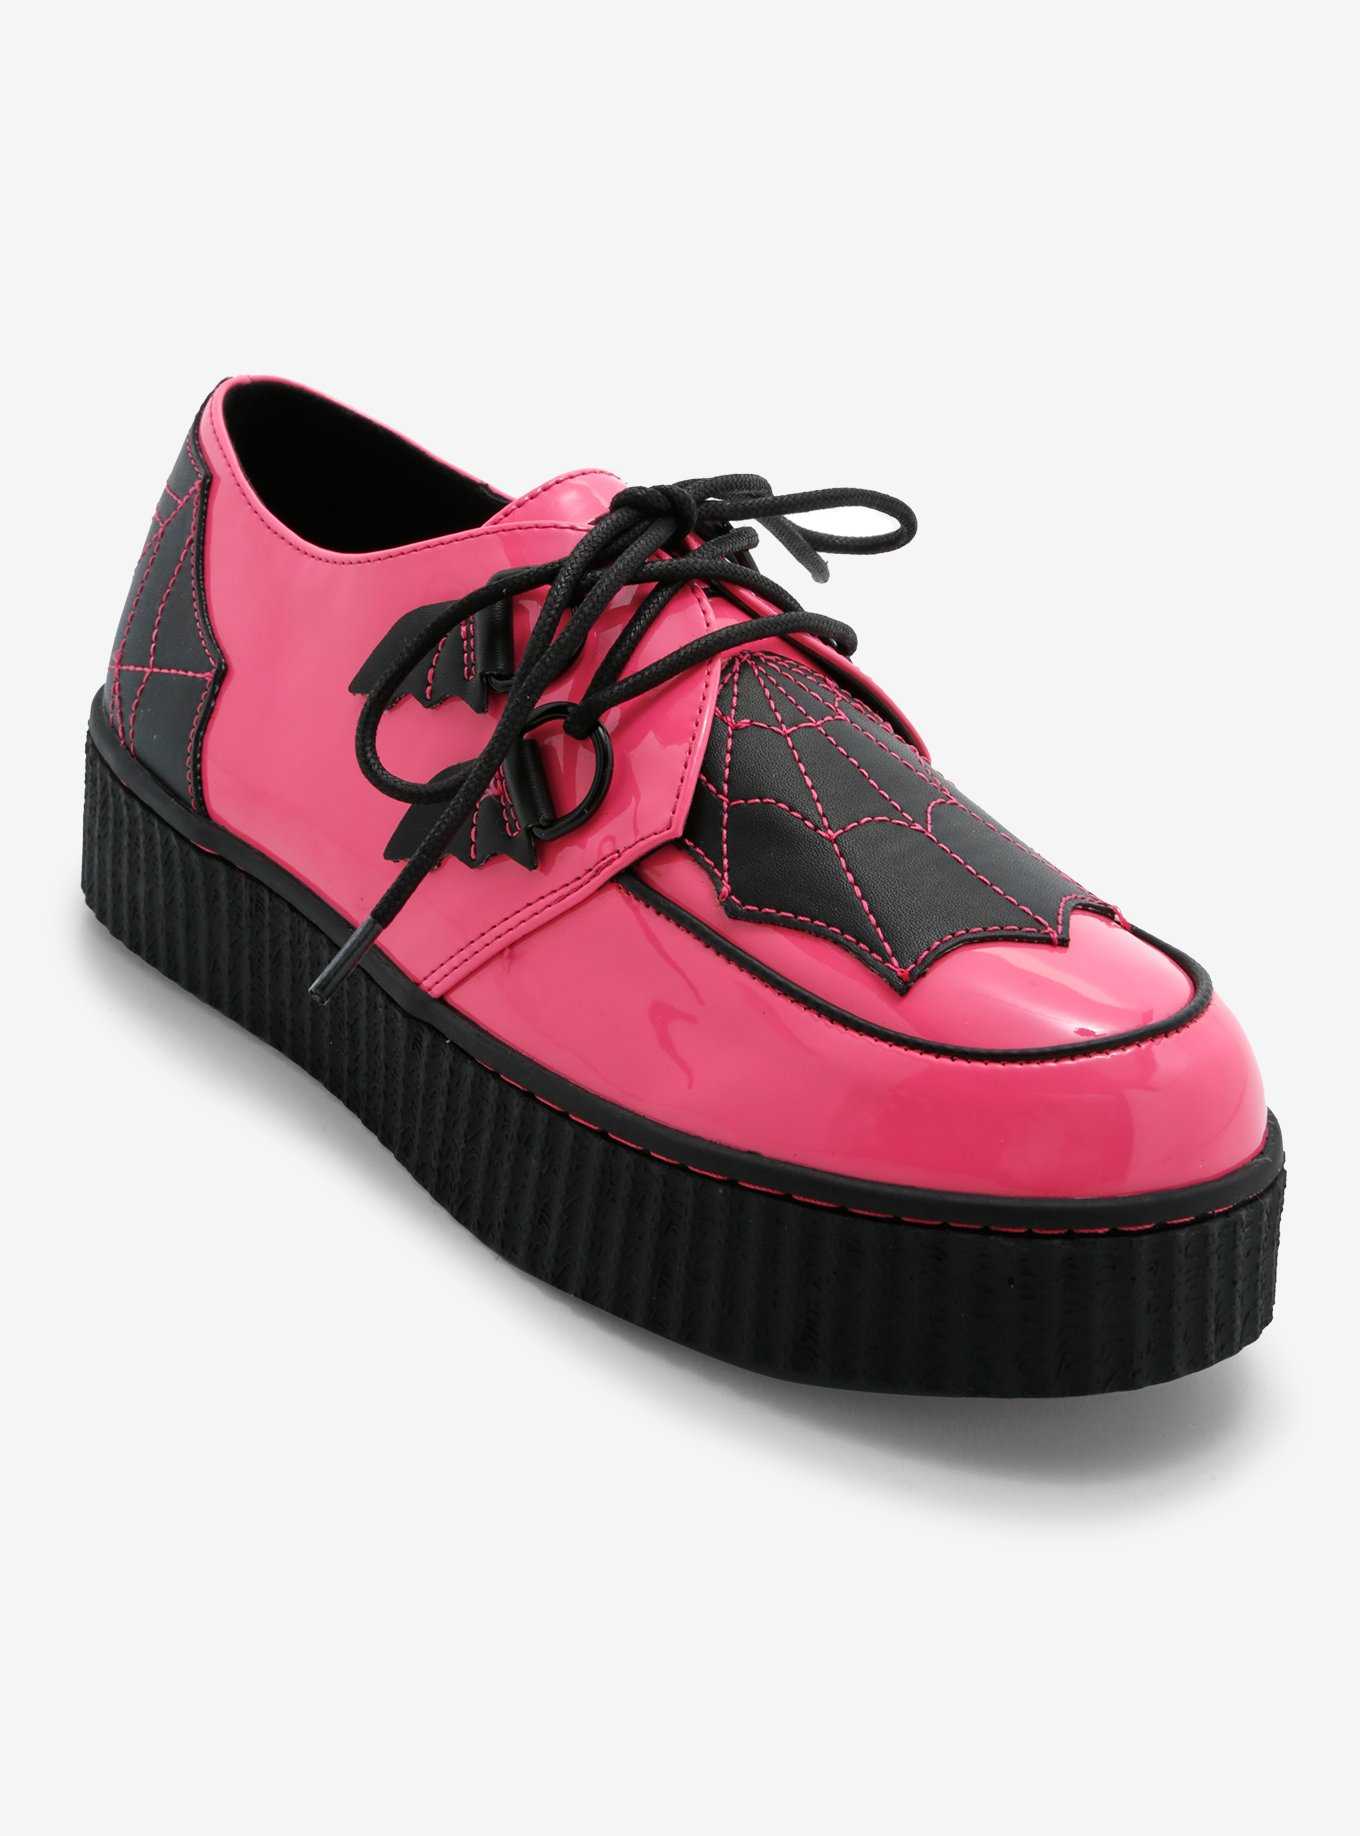 Girls Creepers: Platform Creepers, Suede Creepers & More | Hot Topic